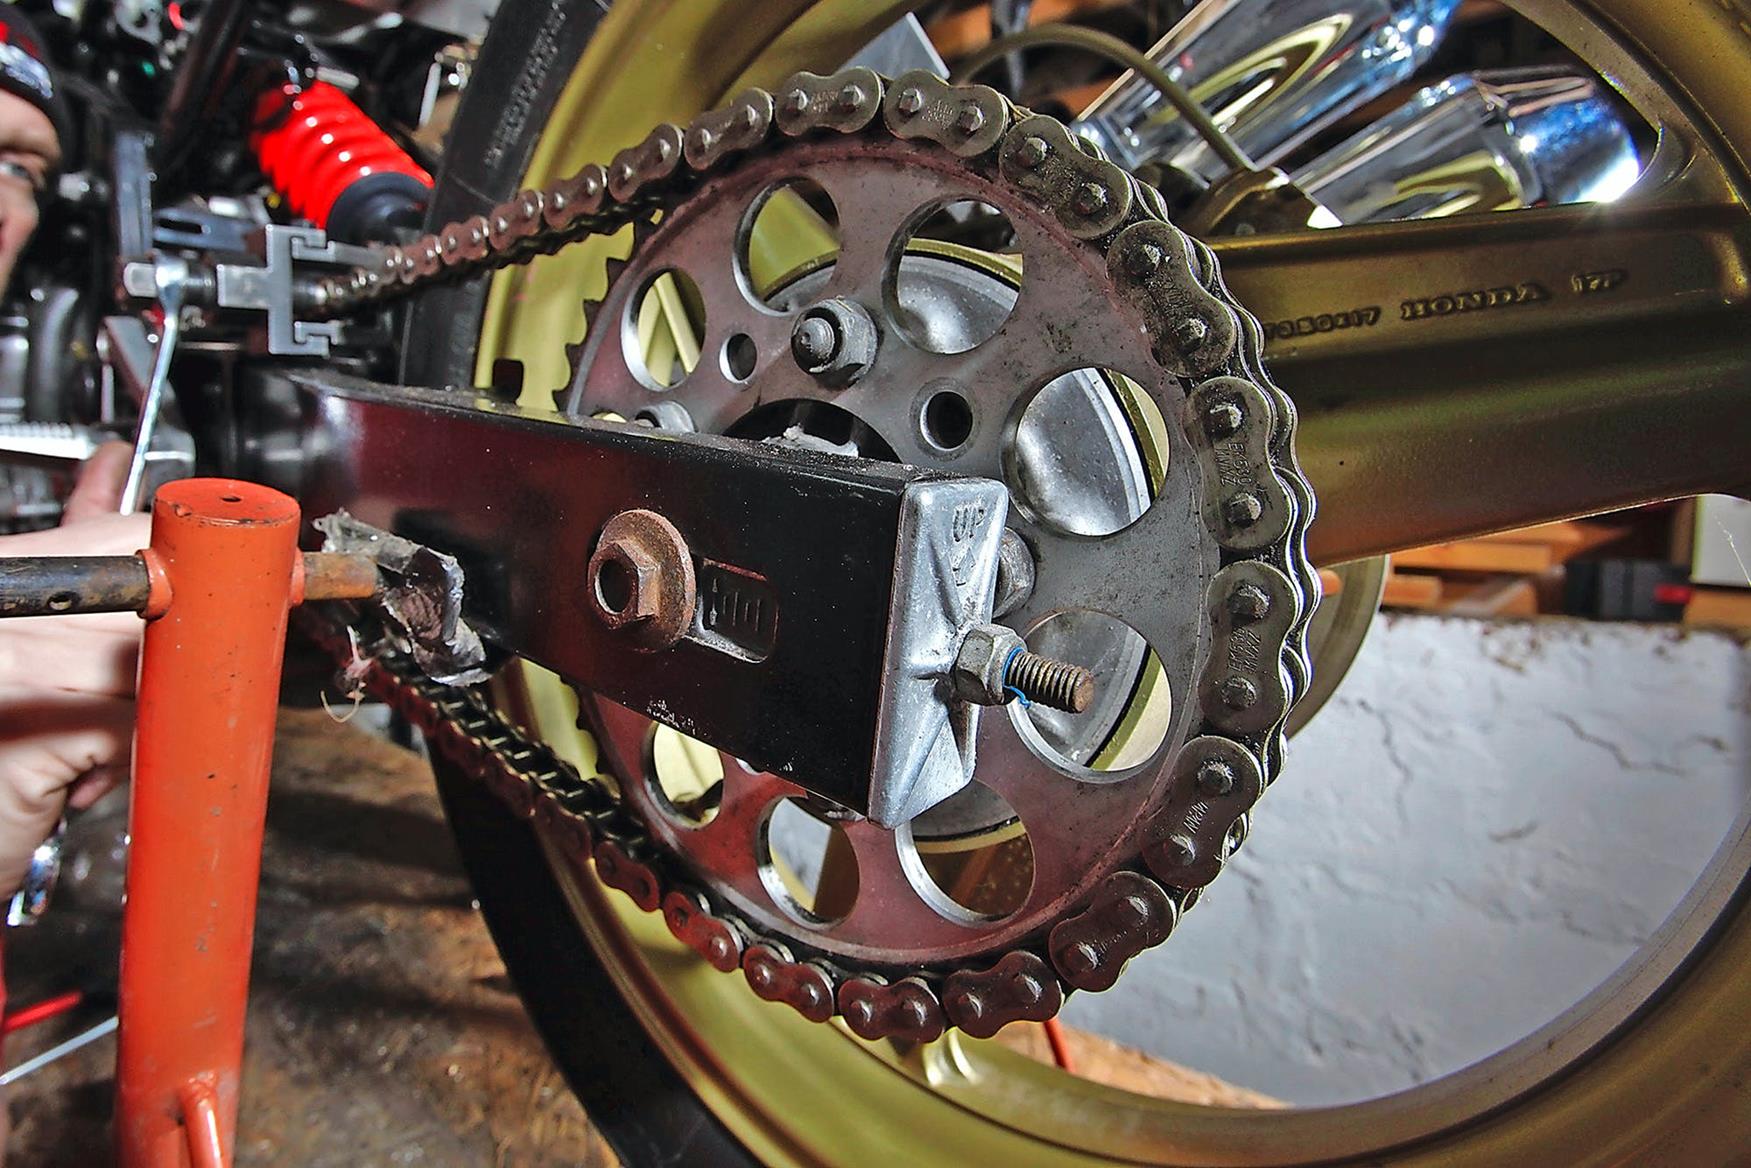 Tips and tricks to get the motorcycle chain in good condition